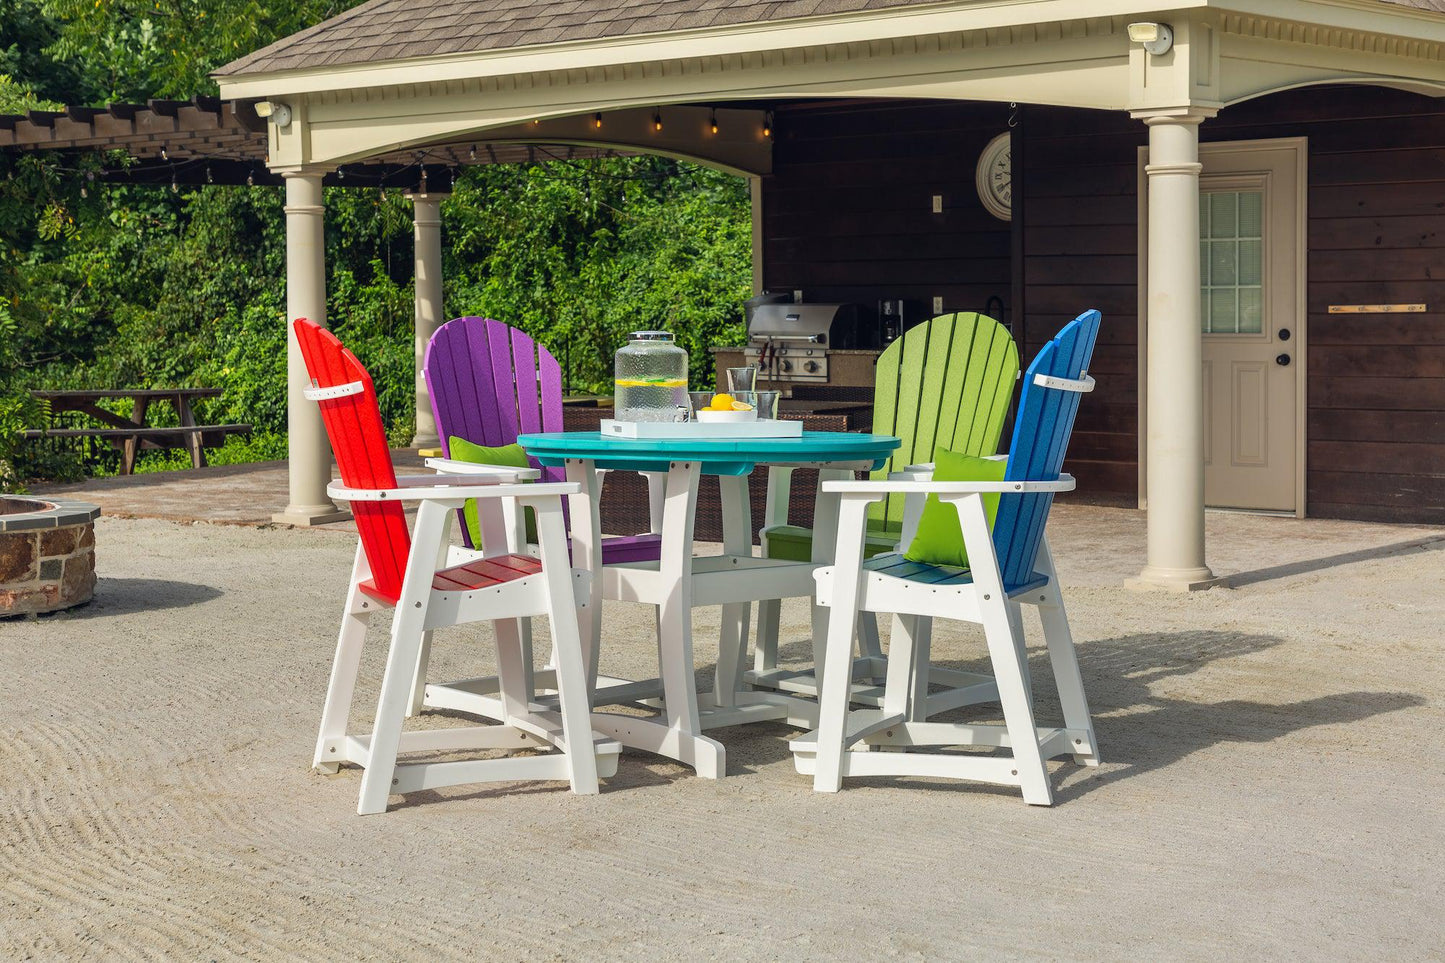 Patiova Recycled Plastic Amish Crafted Adirondack Bar Chair - LEAD TIME TO SHIP 4 WEEKS